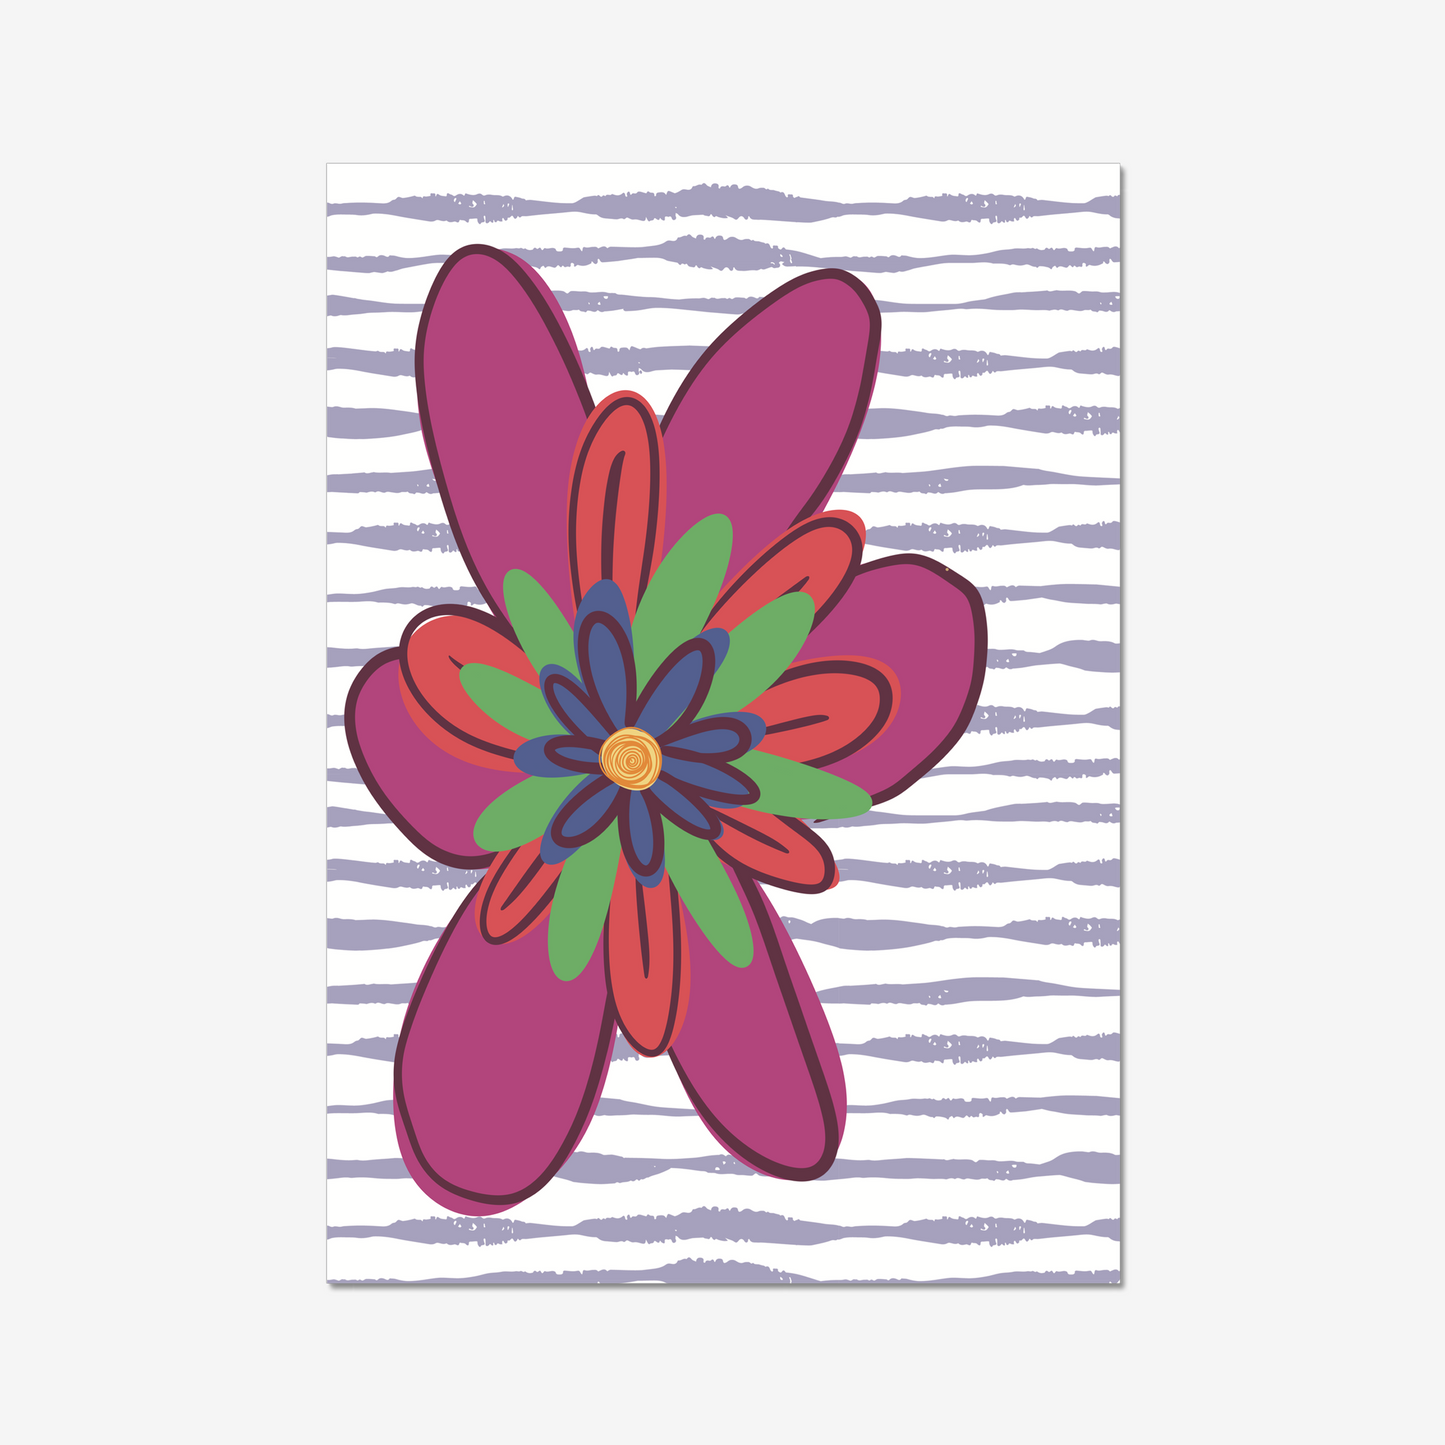 This Colourful Flower Art Print is perfect for anyone who wants to add a touch of personality and quirkiness to their home décor. The bold and brightly coloured flower stands out against the purple stripe background, making it a real eye-catcher.